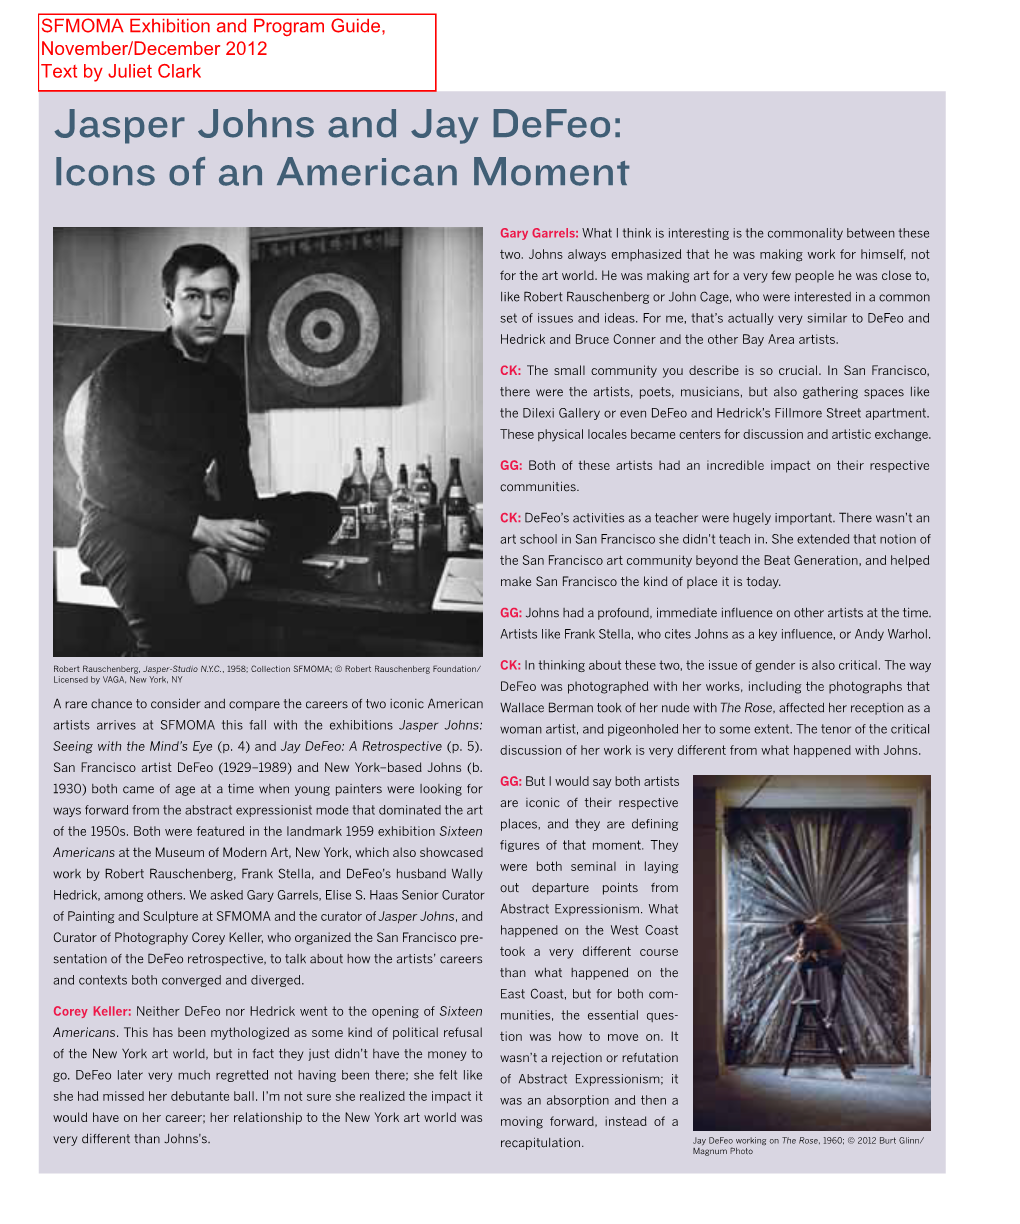 Jasper Johns and Jay Defeo: Icons of an American Moment